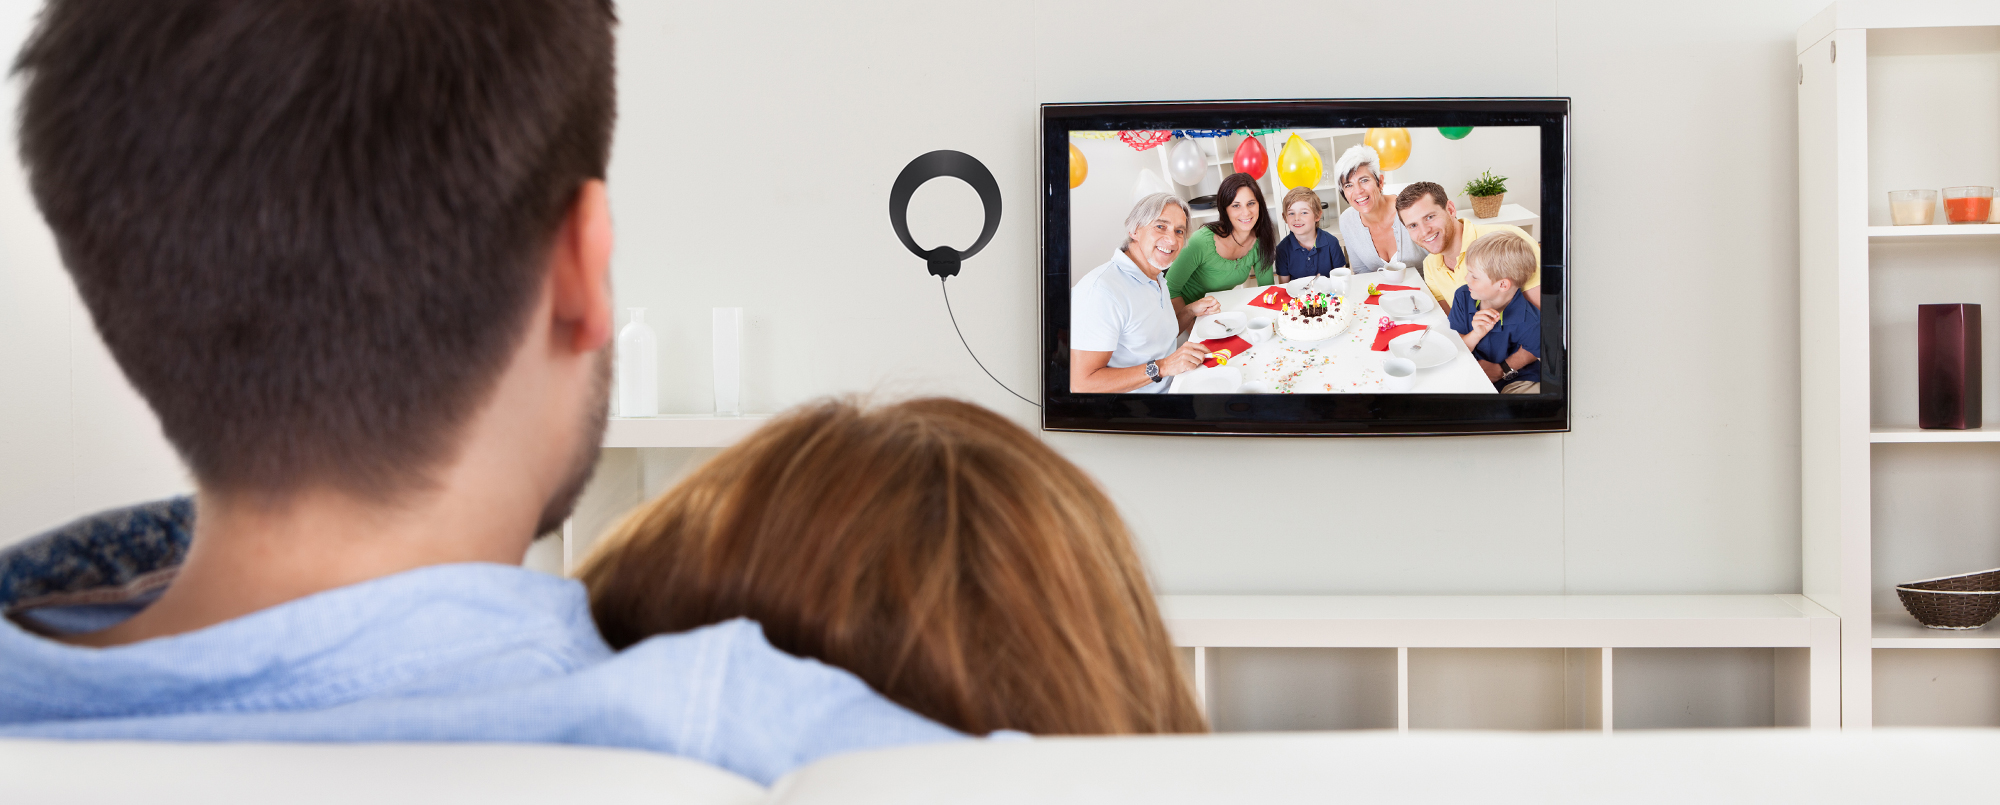 Results image of couple watching TV with antenna